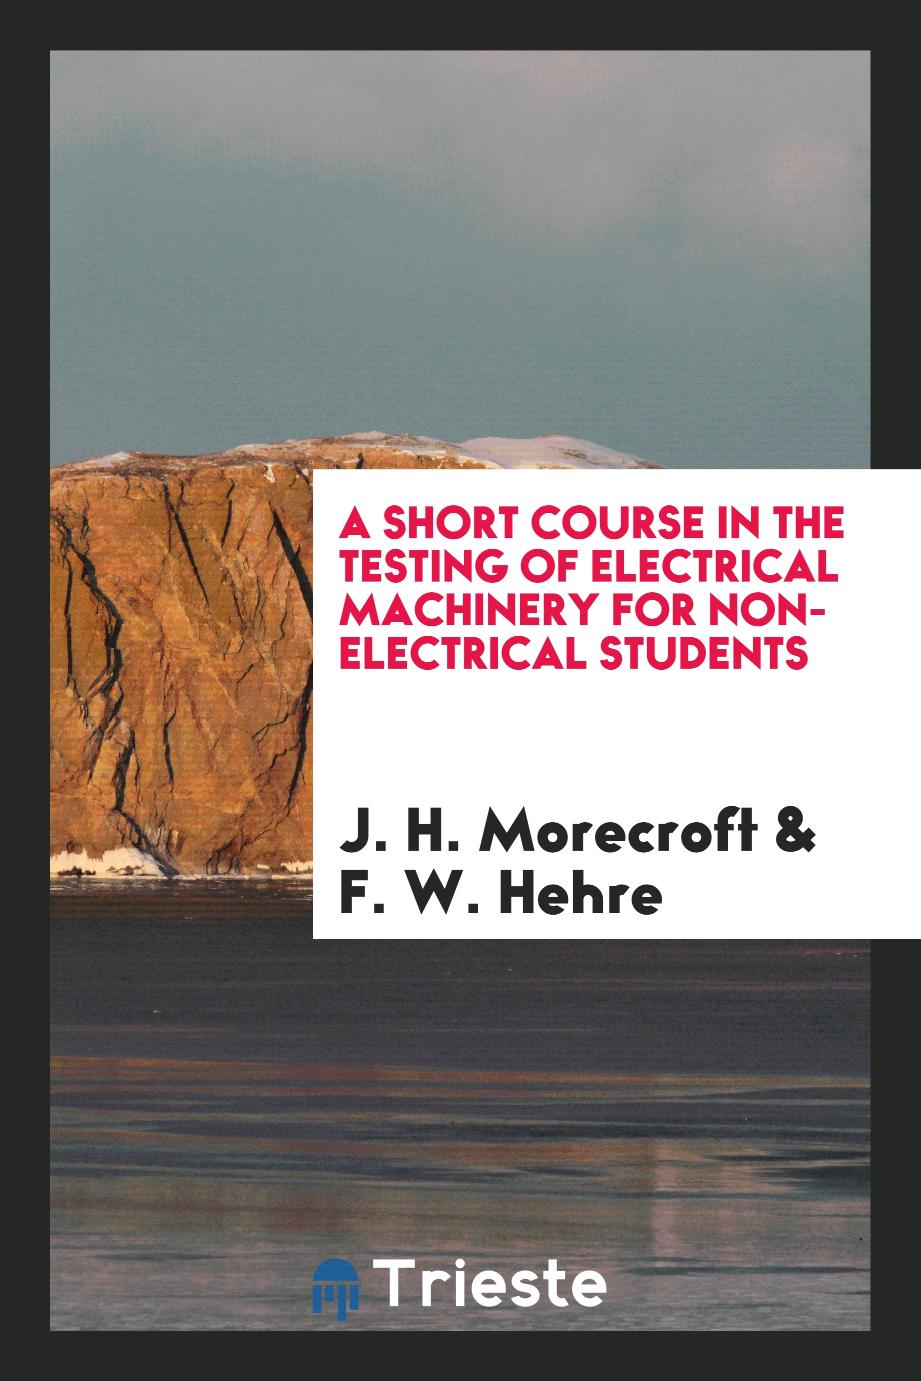 A short course in the testing of electrical machinery for non-electrical students